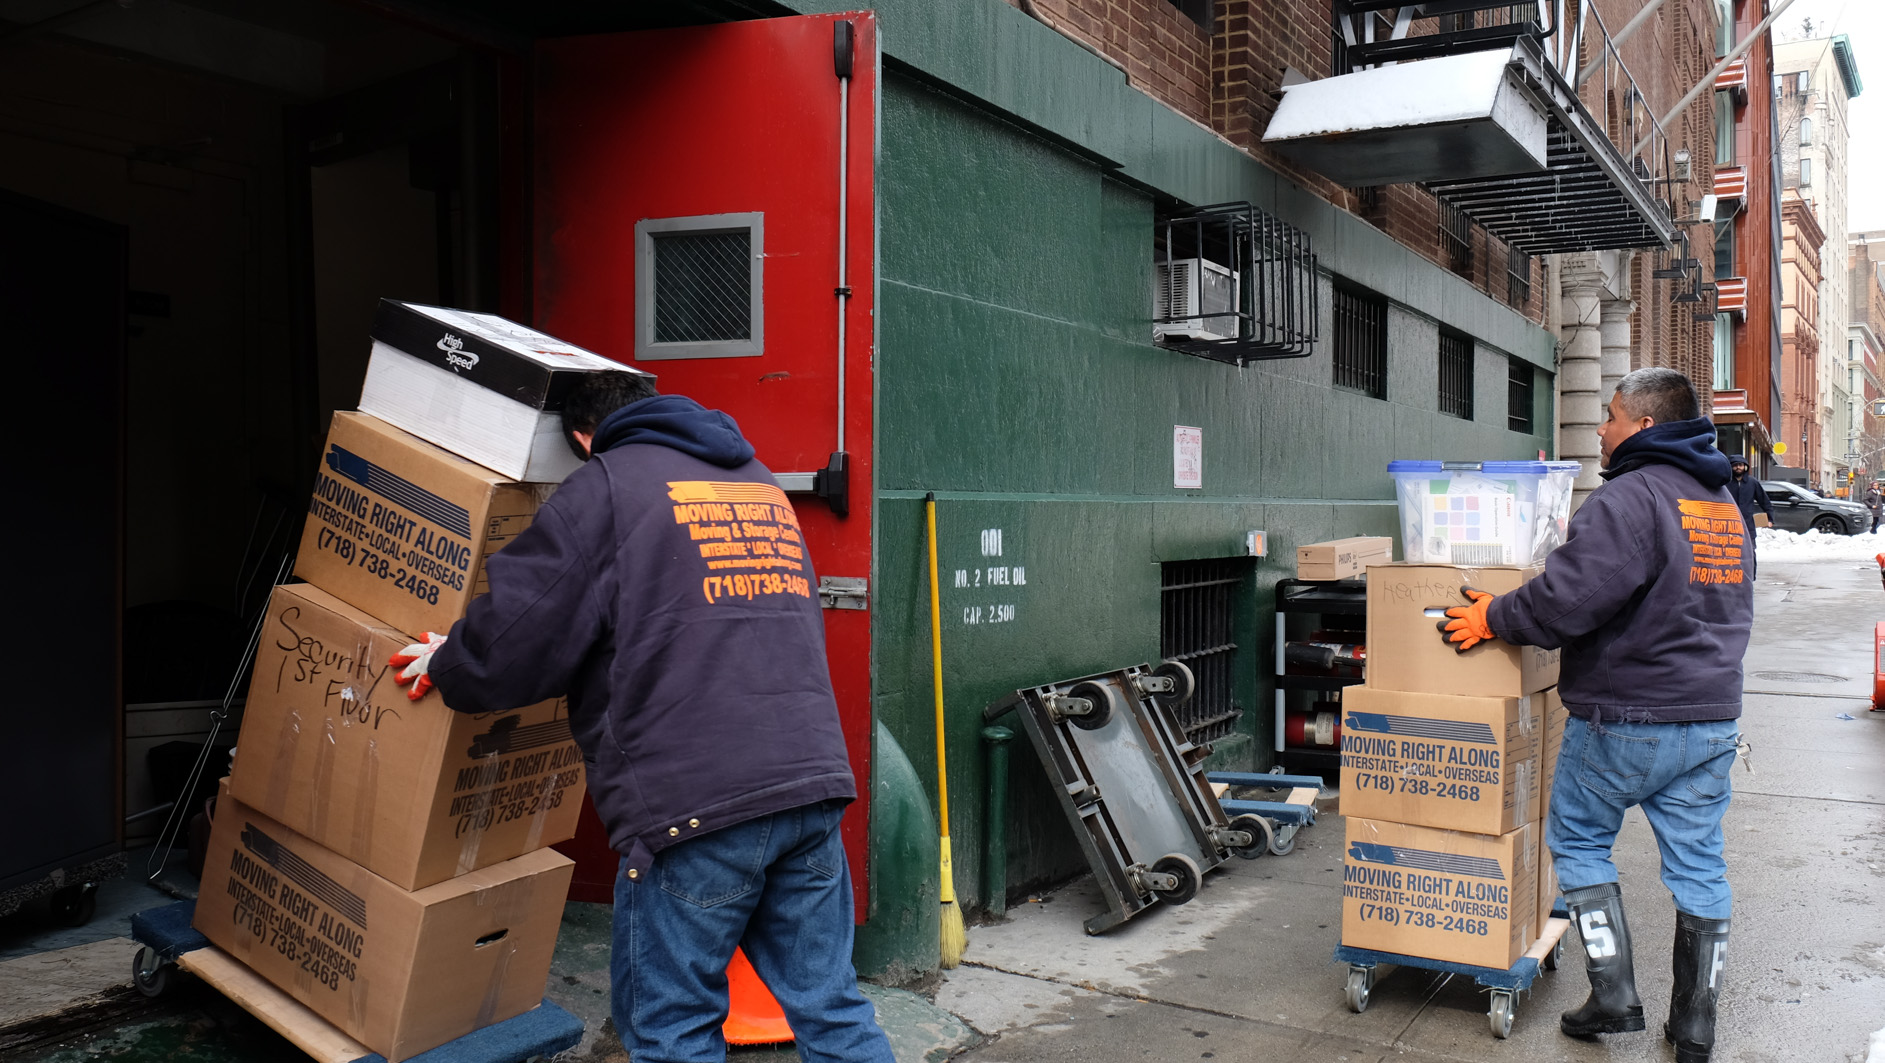 On Wed., March 15, movers were moving boxes out of 350 Lafayette St. The former women's shelter there has relocated to Brooklyn.